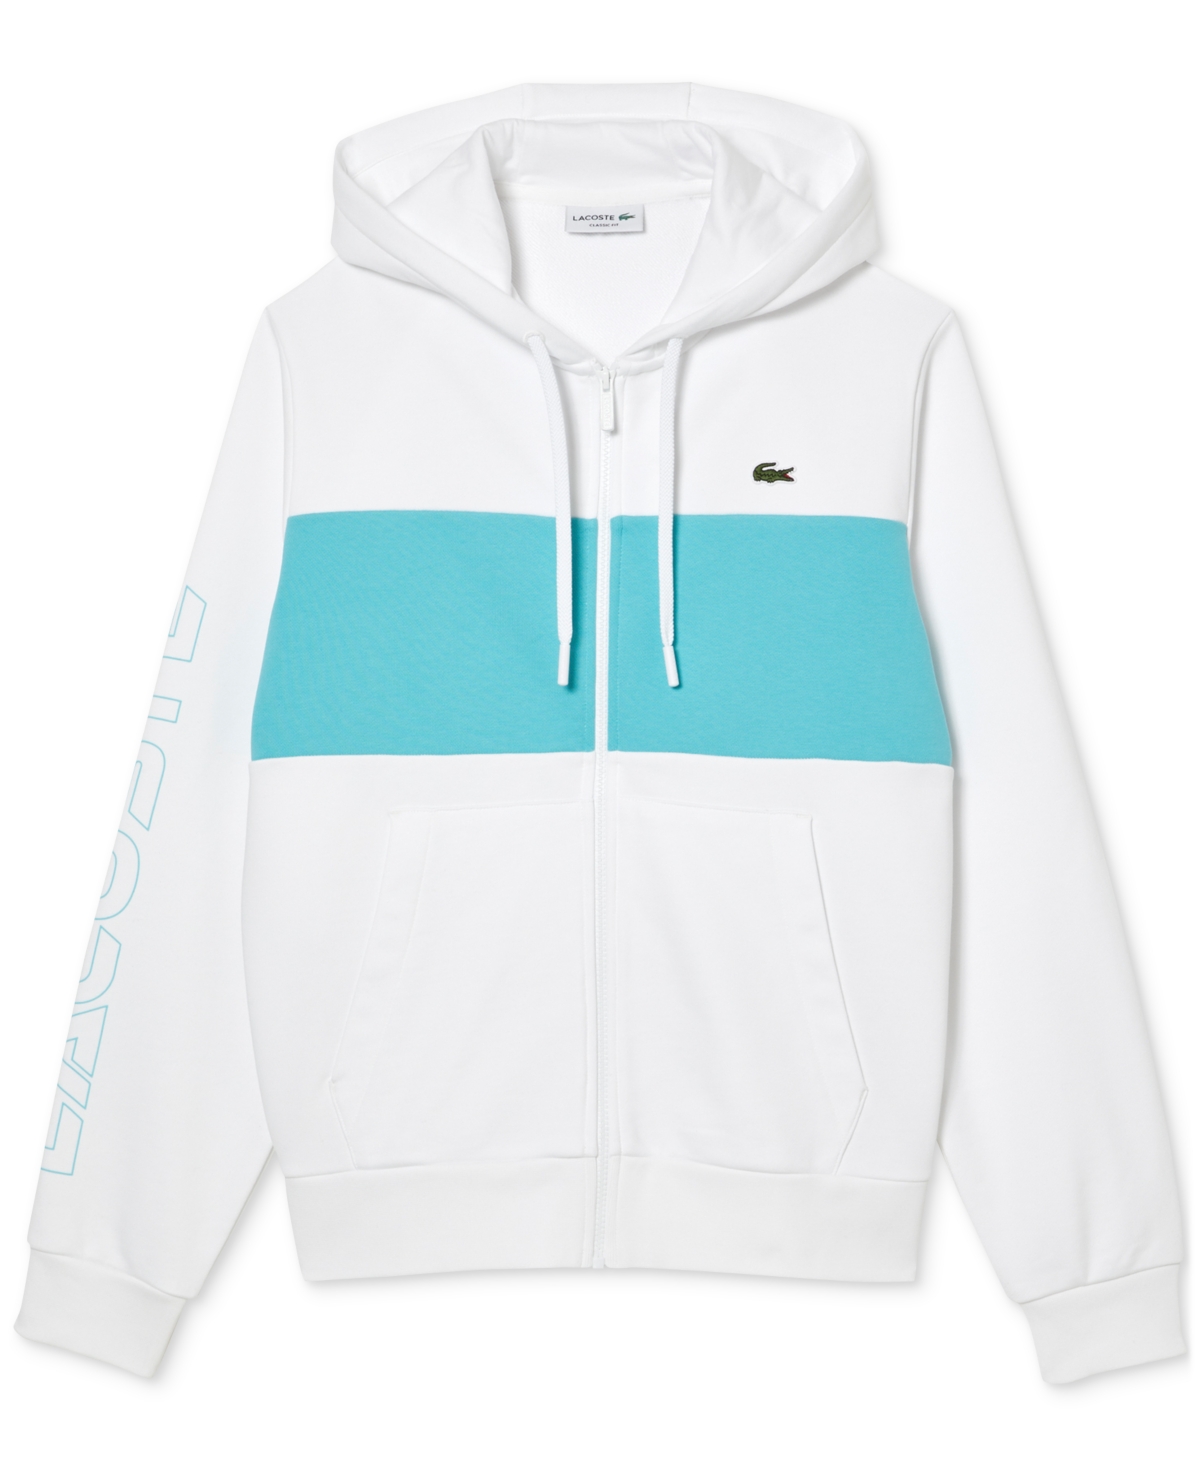 Lacoste Men's Classic Fit Colorblocked Zip-front Hooded Sweatshirt In Blanc,anse